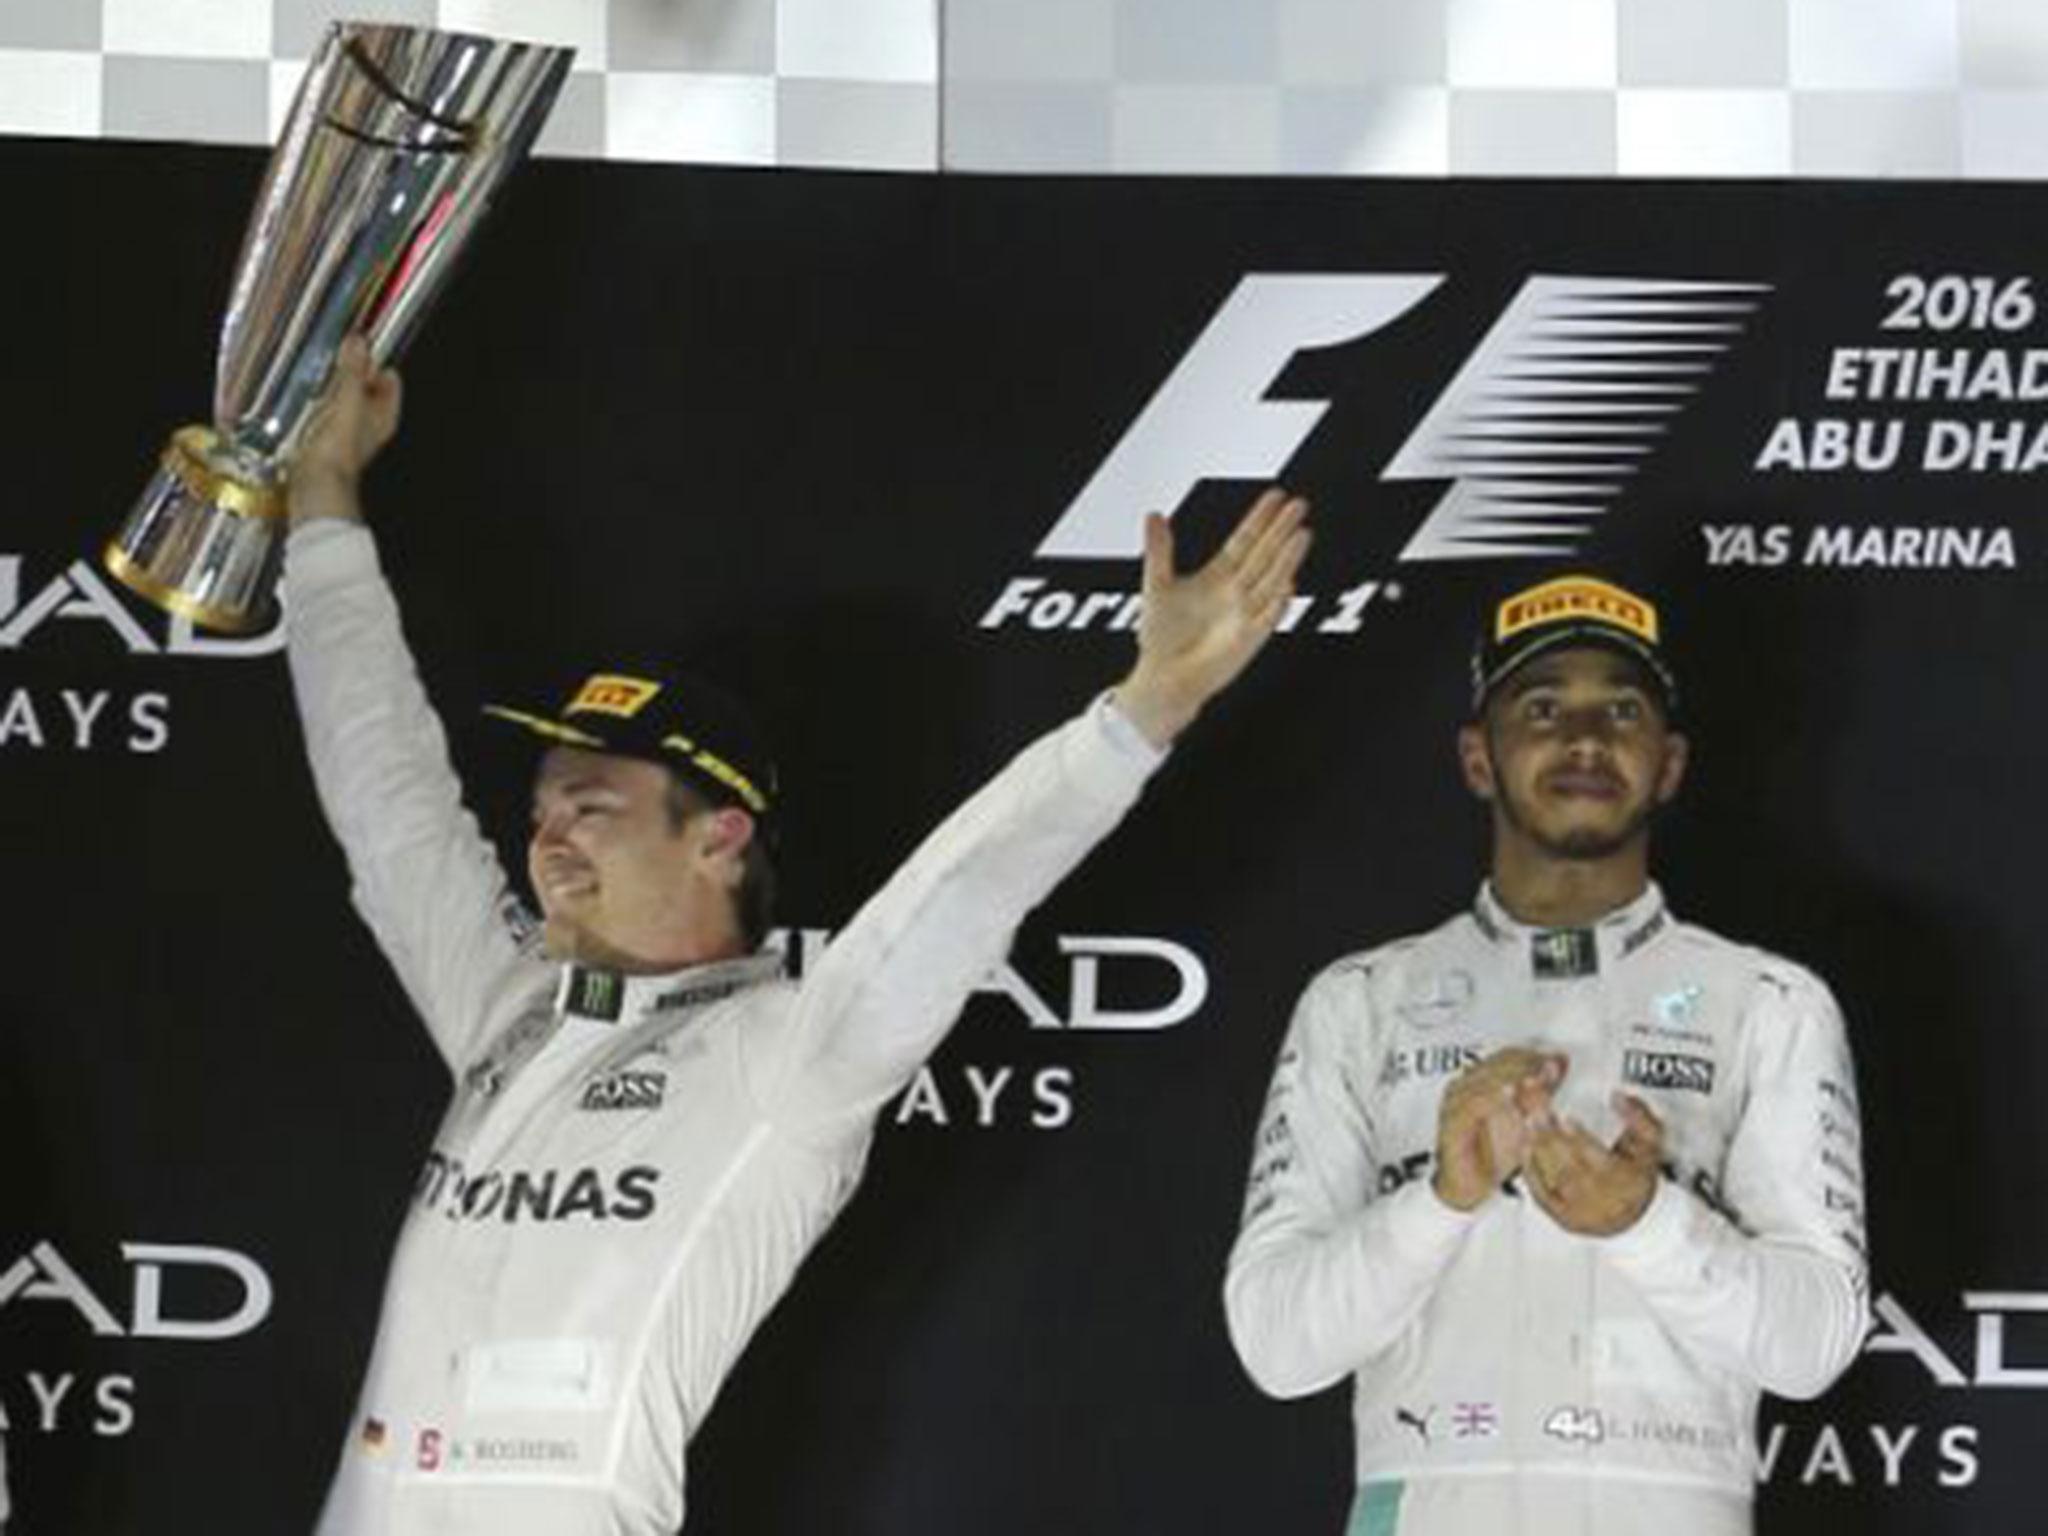 Hamilton's dip in form in the middle of the season caused viewers to tune out